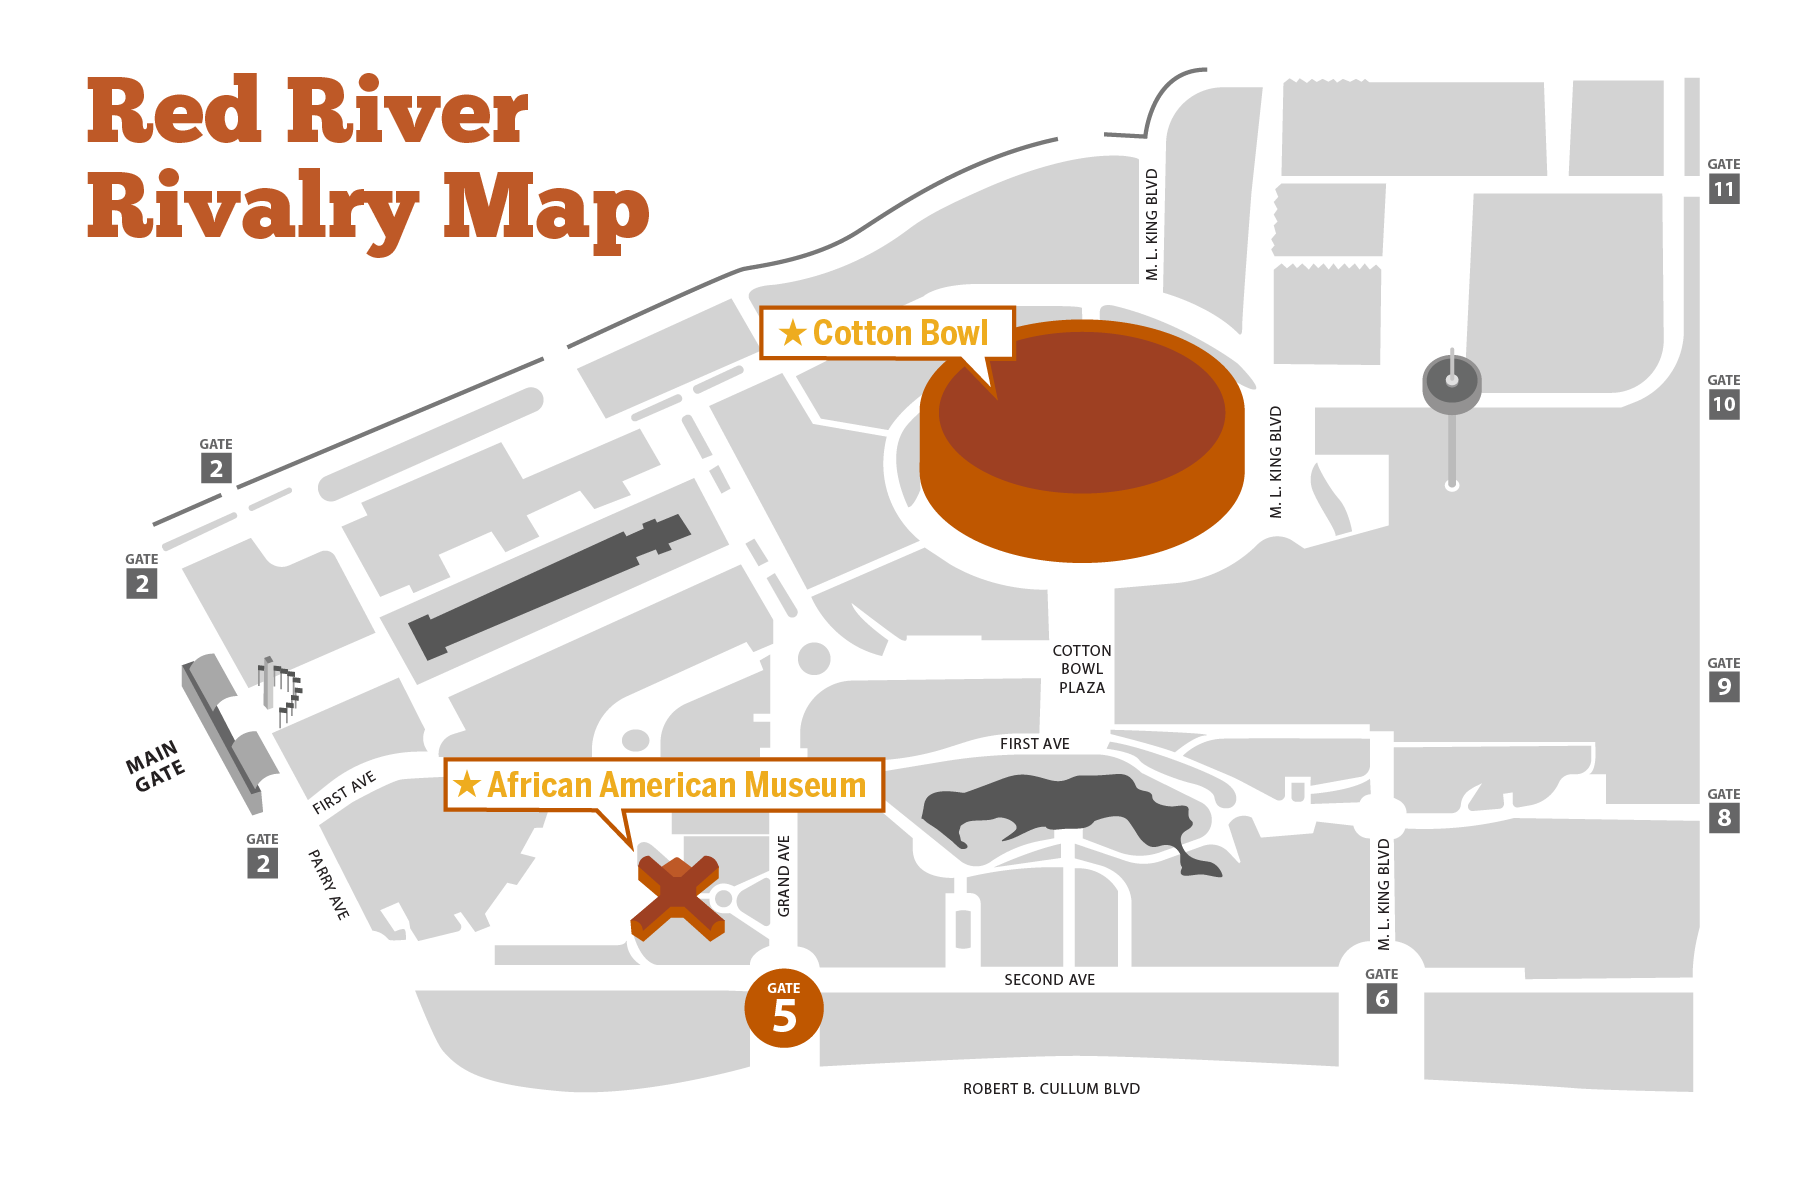 Red River Rivalry The University of Texas at Austin